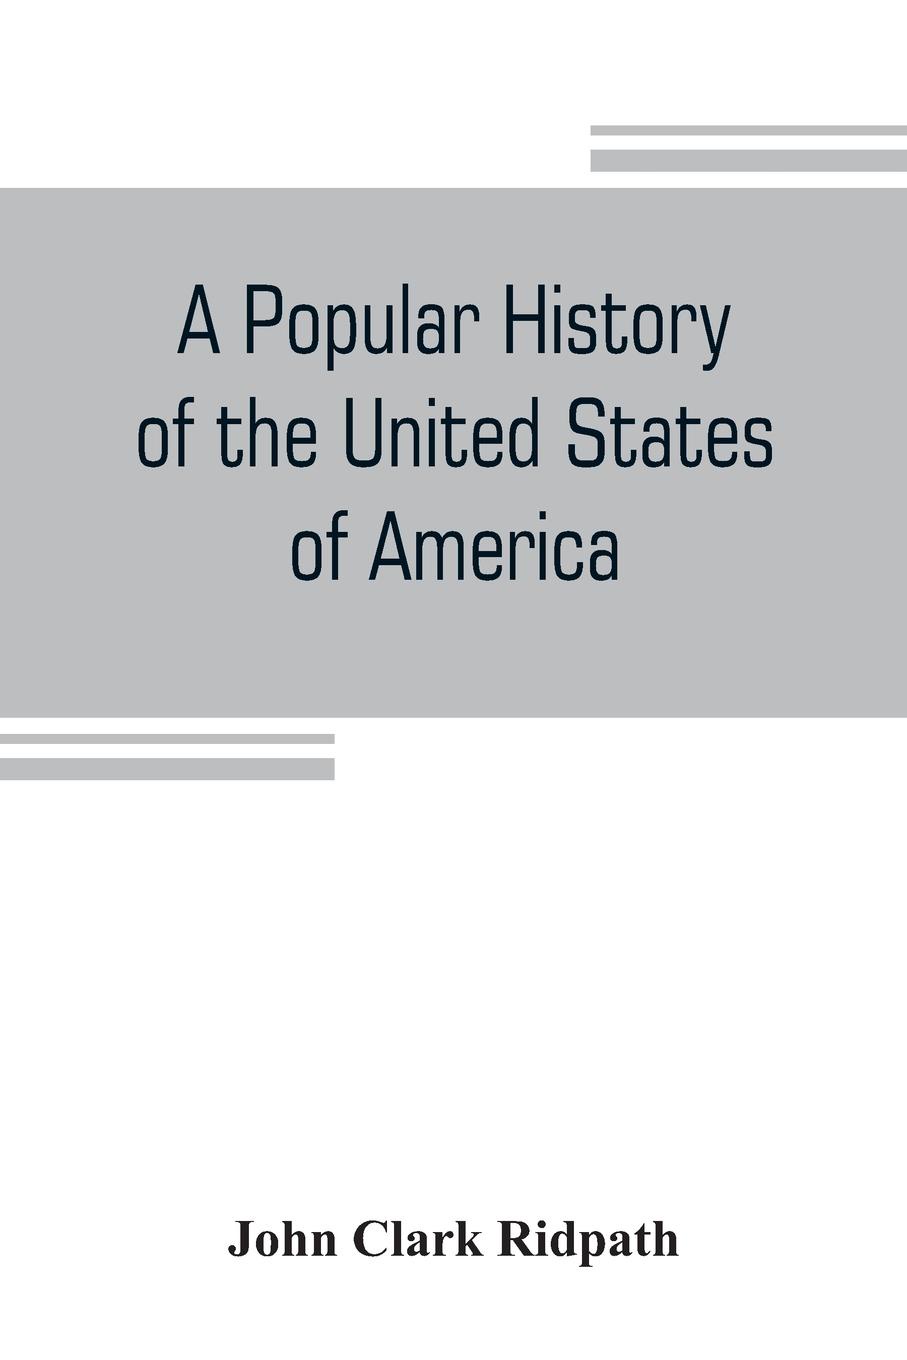 A popular history of the United States of America. from the aboriginal times to the present day : embracing an account of the aborigines, the Norsemen in the New world, the discoveries by the Spaniards, English, and French, the planting of settlem...